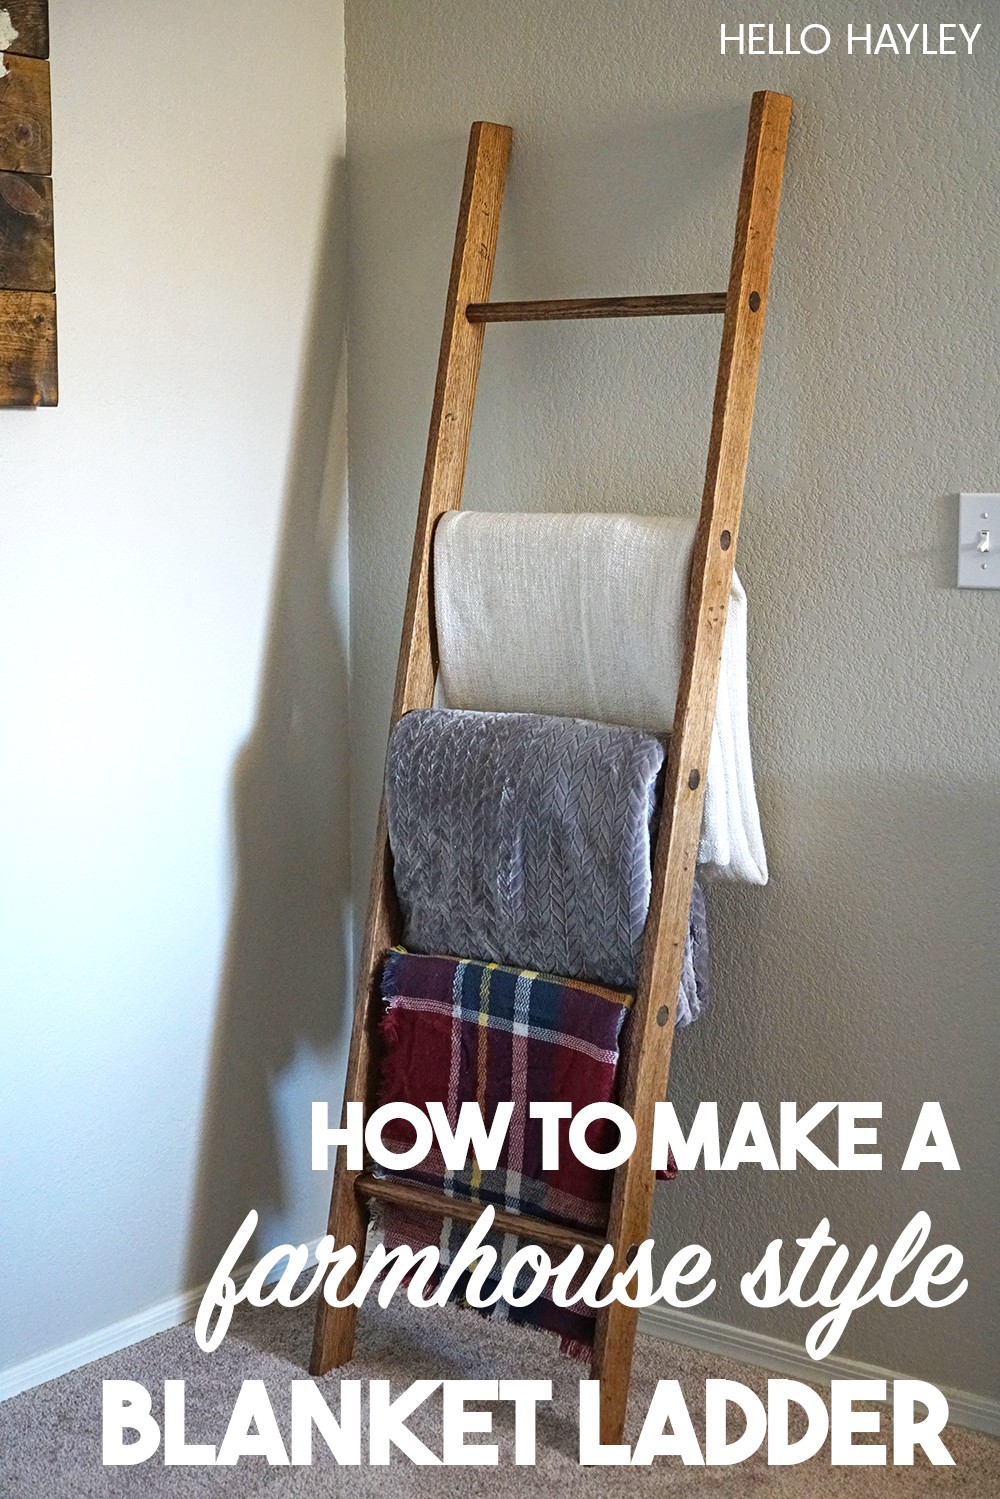 Pin How to Make a Blanket Ladder!